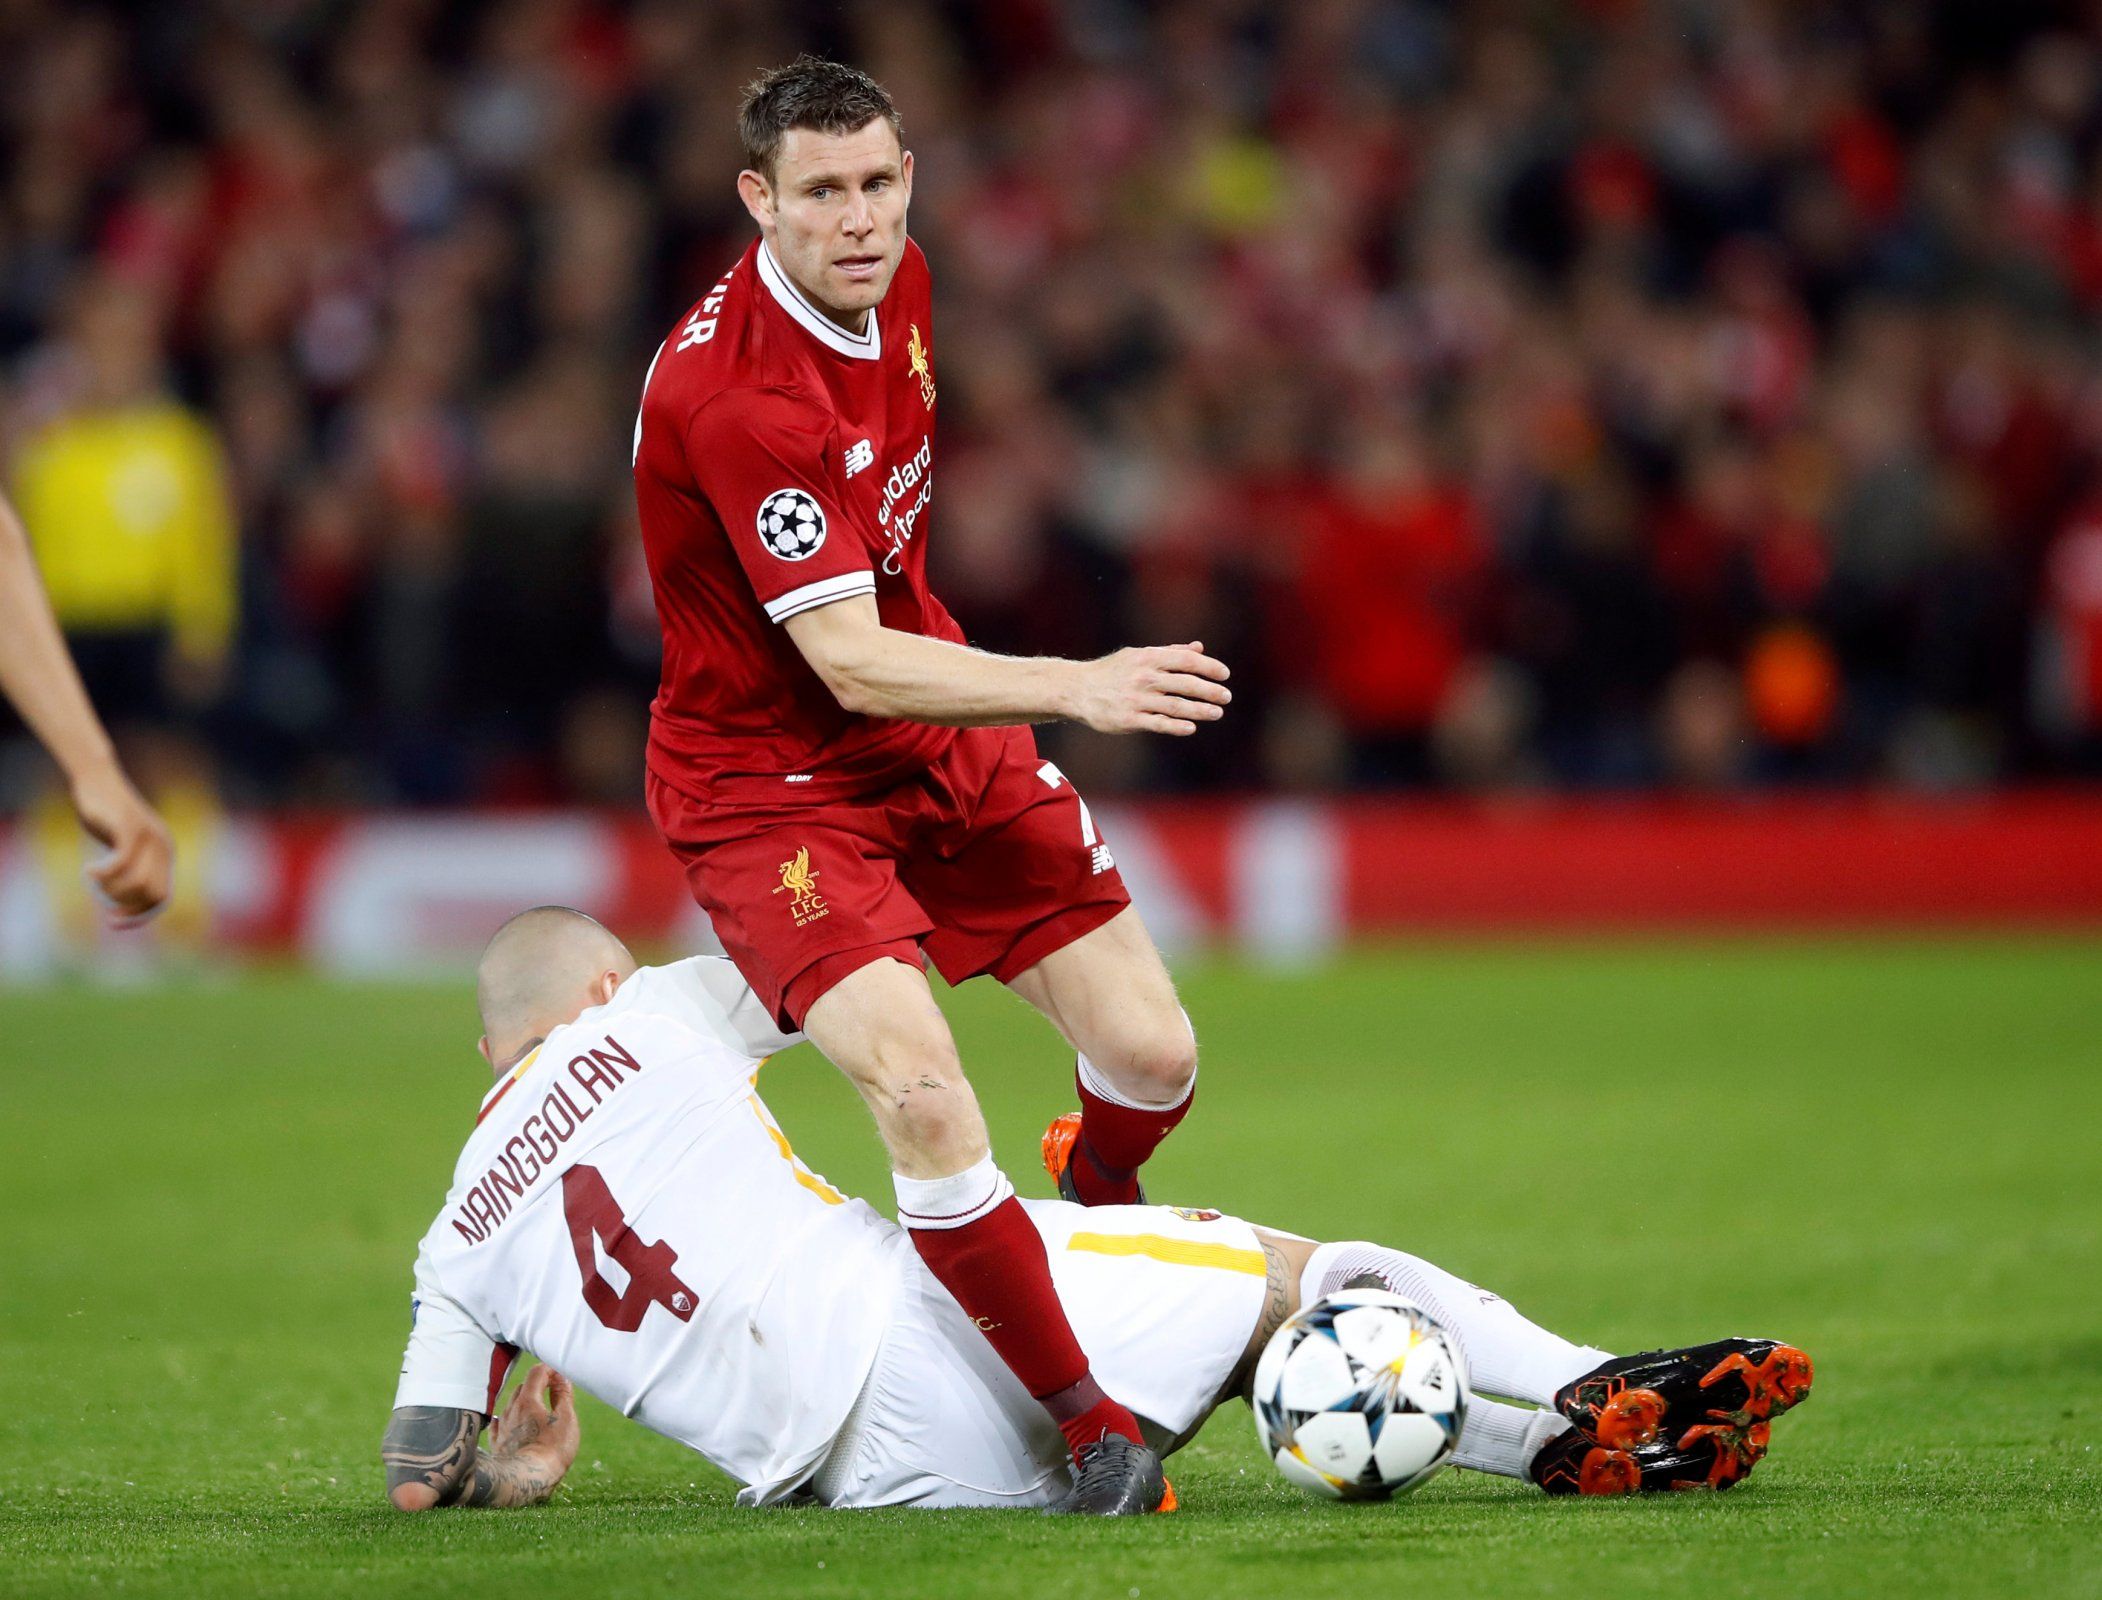 James Milner of Liverpool against Roma at Anfield